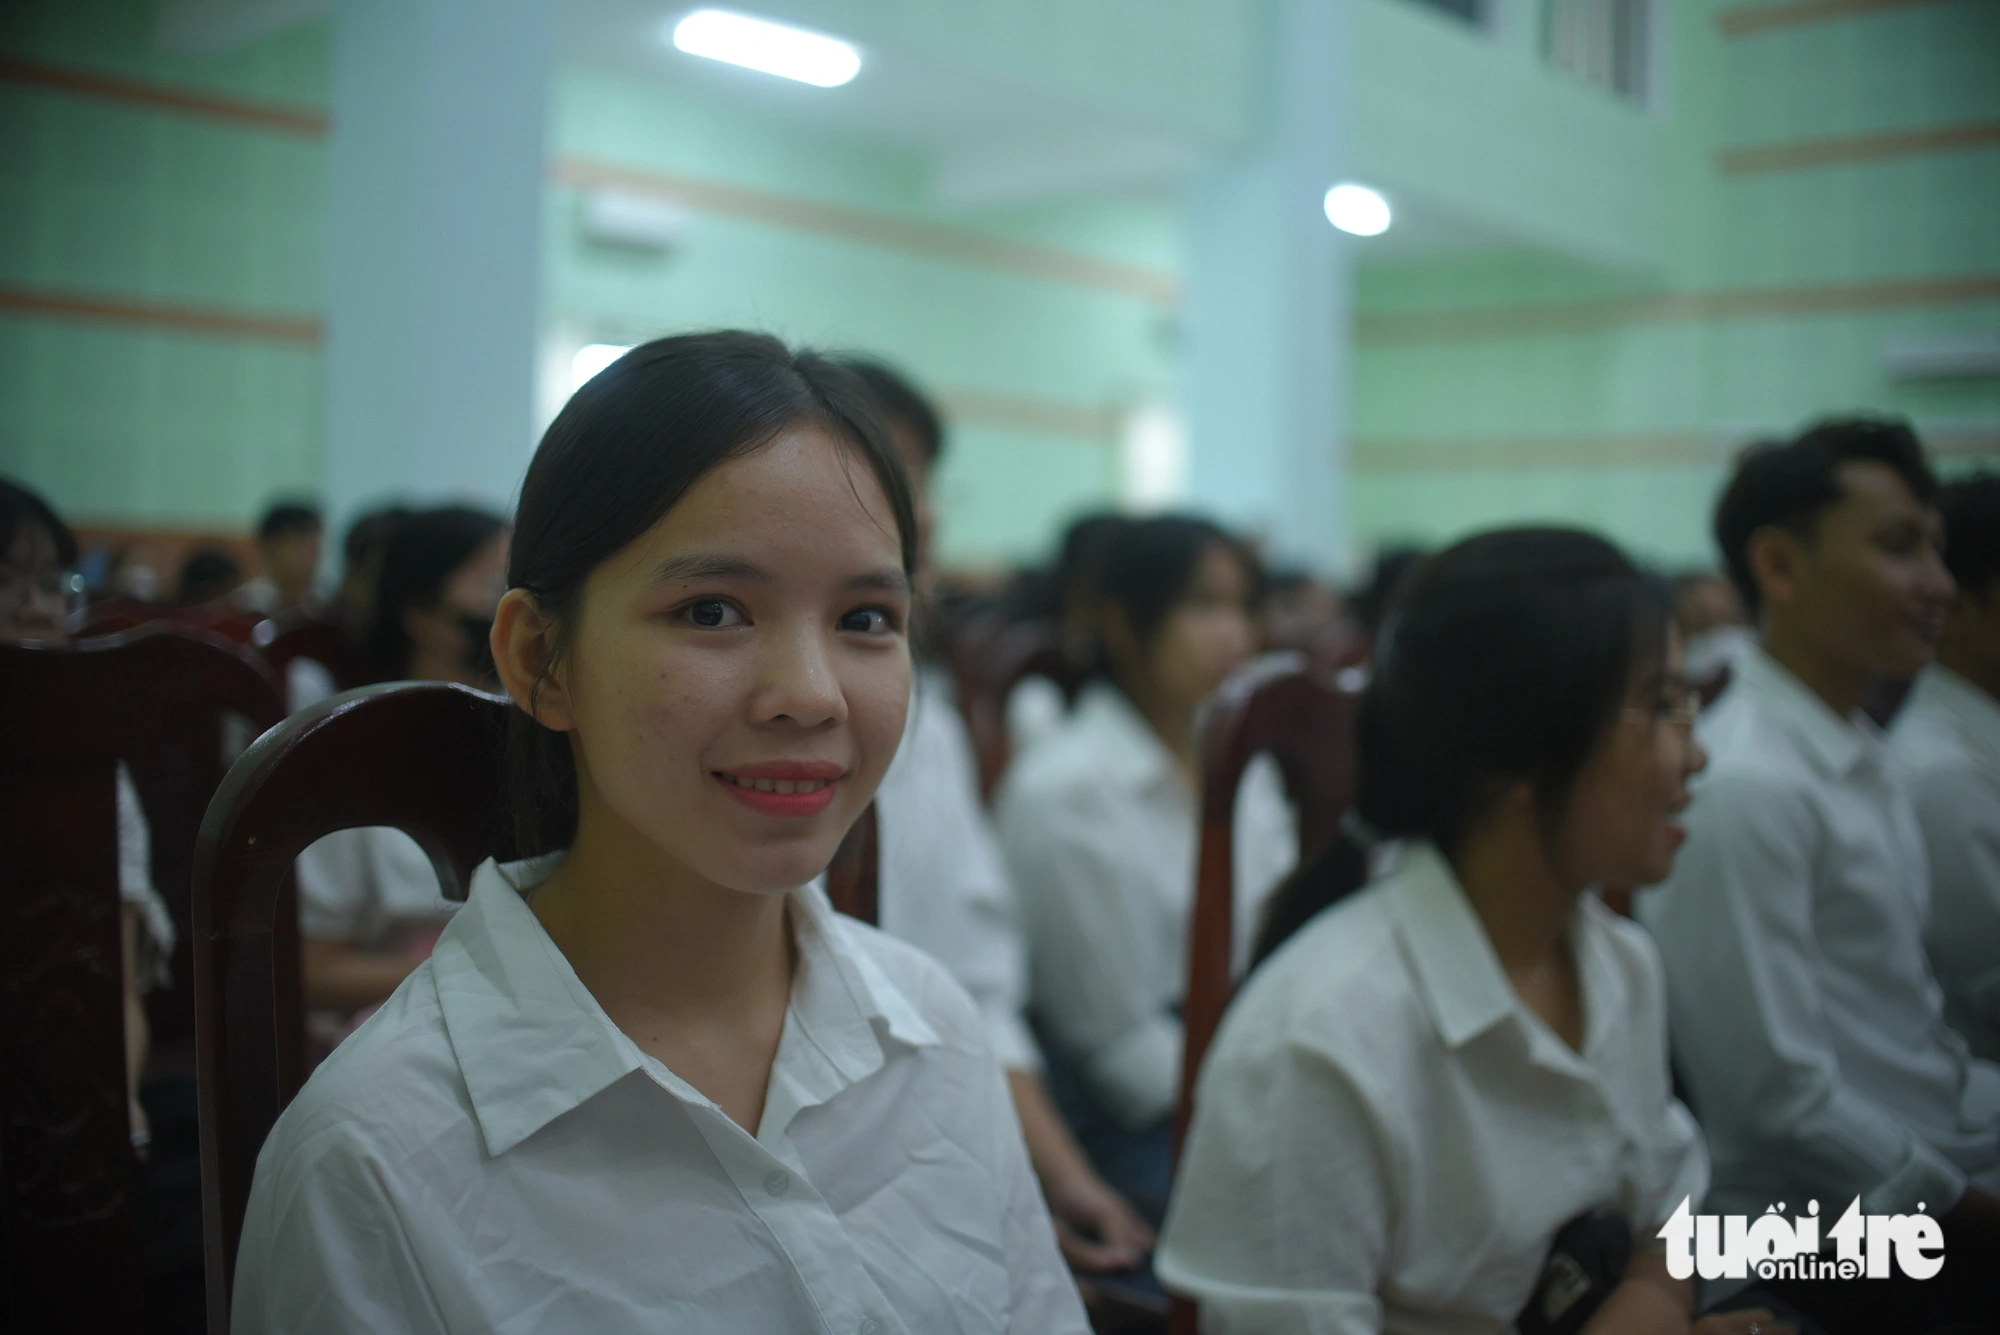 A student's joy at receiving a scholarship - Photo: Lam Thien